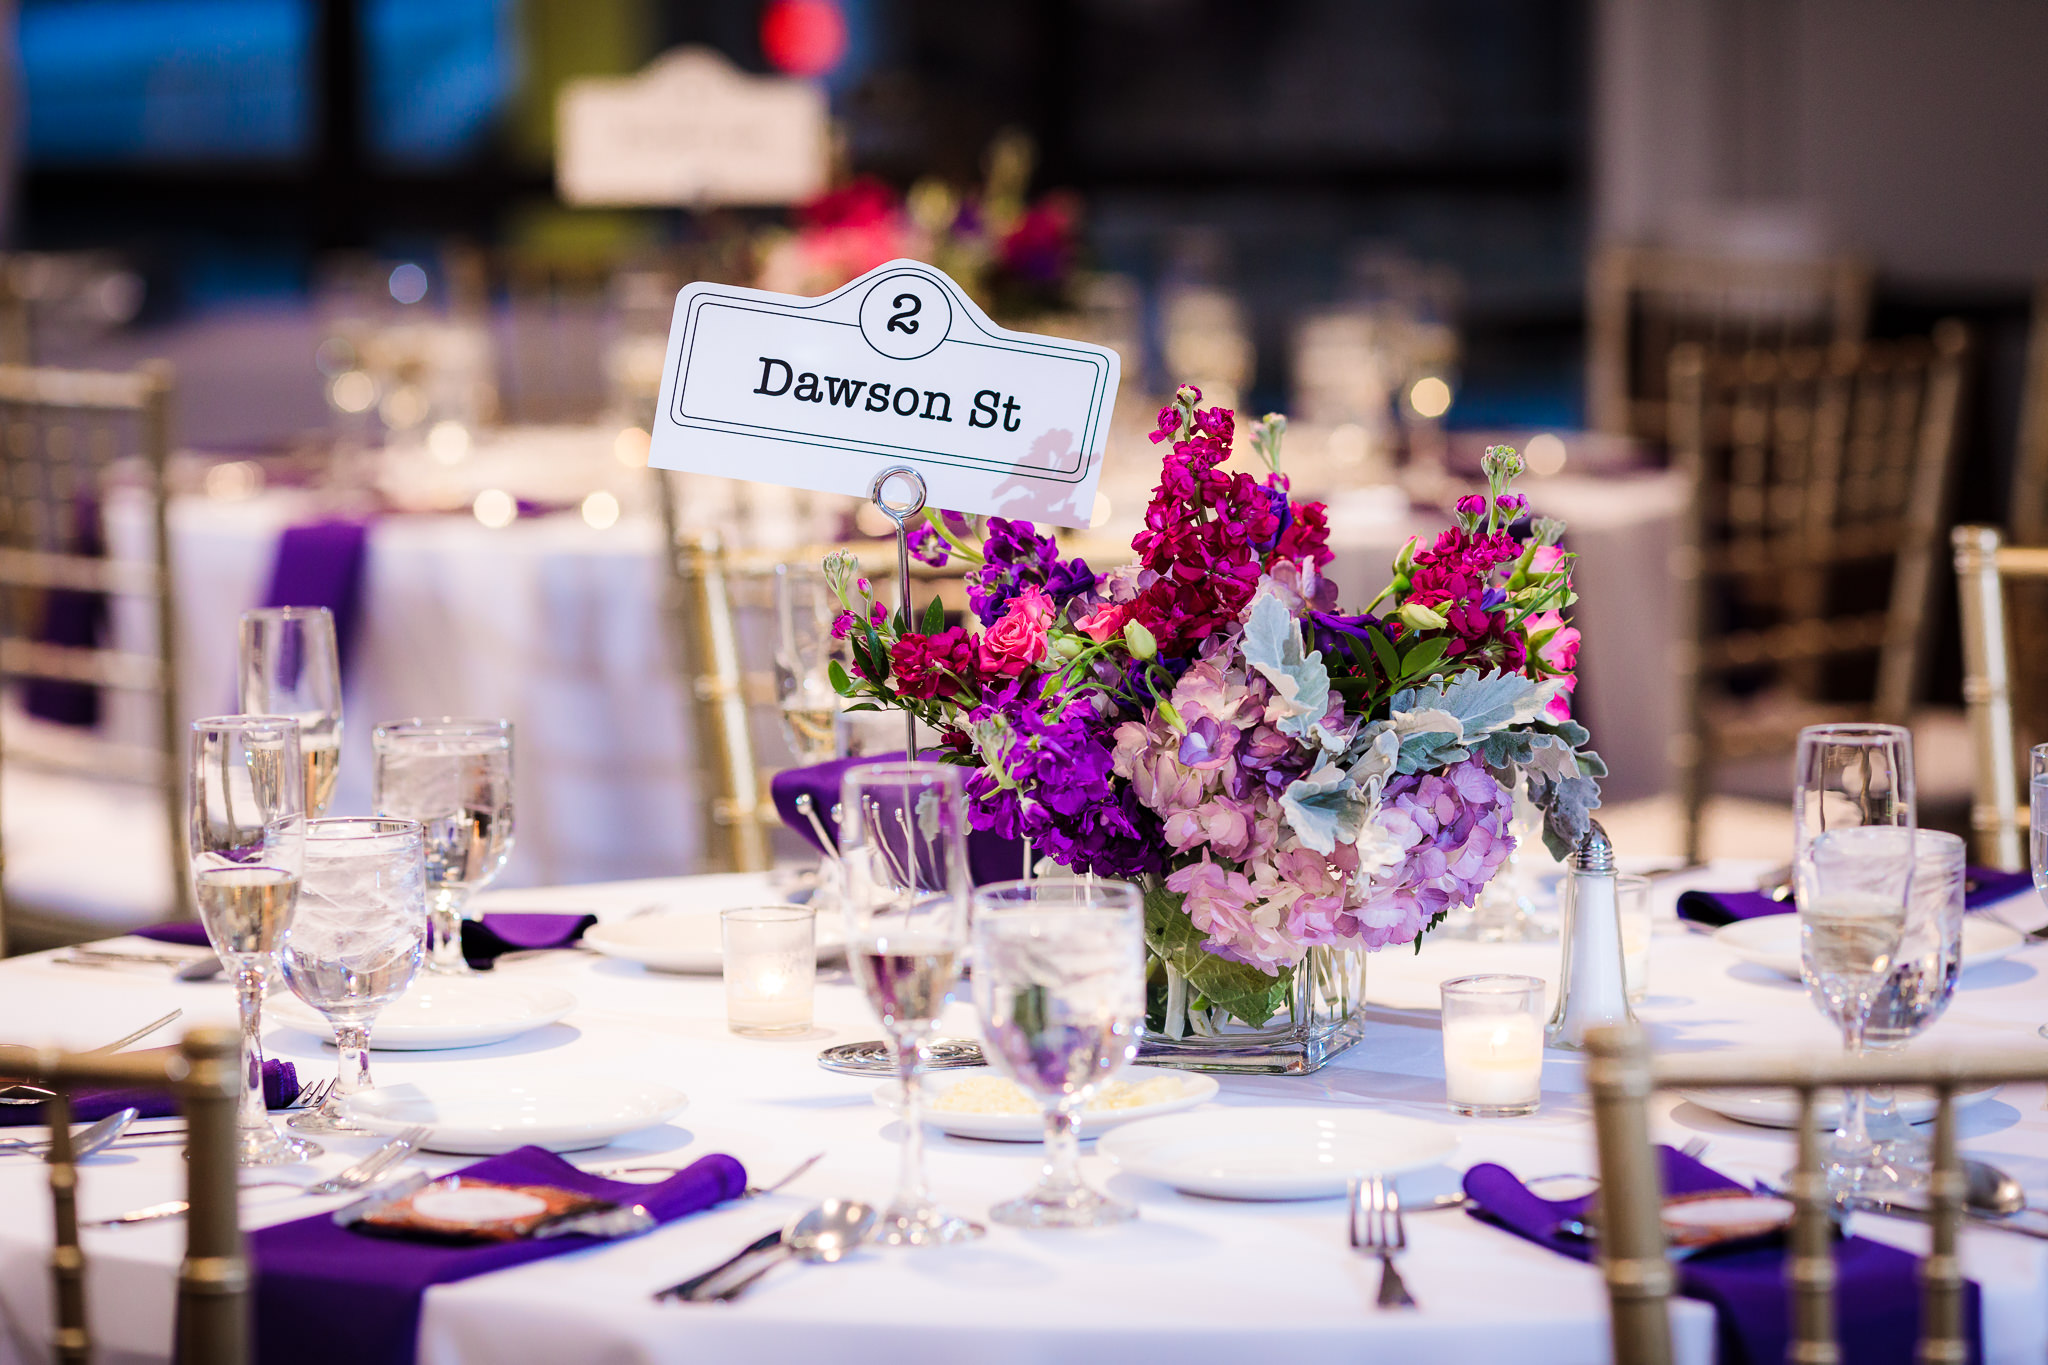 Table numbers use street names from Pittsburgh's Oakland neighborhood at a DoubleTree Pittsburgh Downtown reception; centerpieces by Holly Hanna Floral